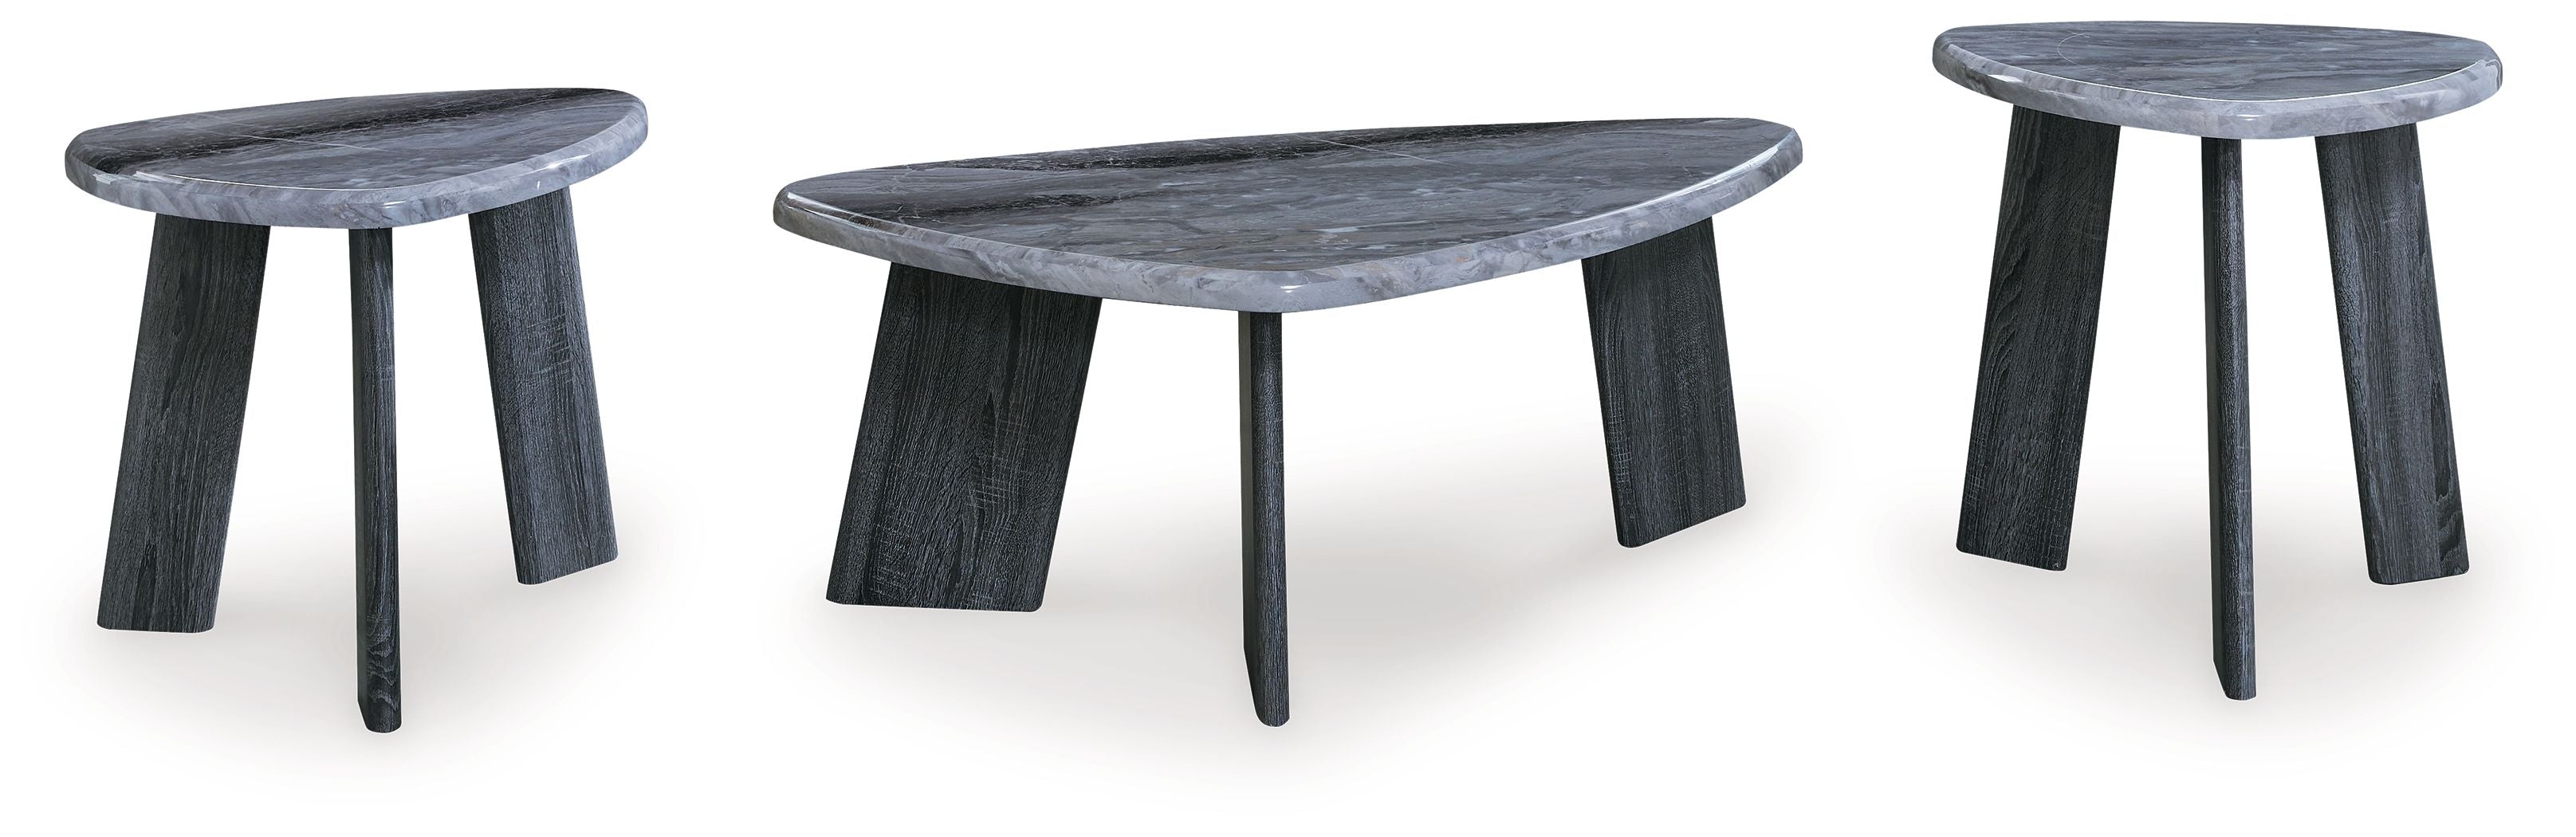 Bluebond - Gray - Occasional Table Set (Set of 3) - 5th Avenue Furniture